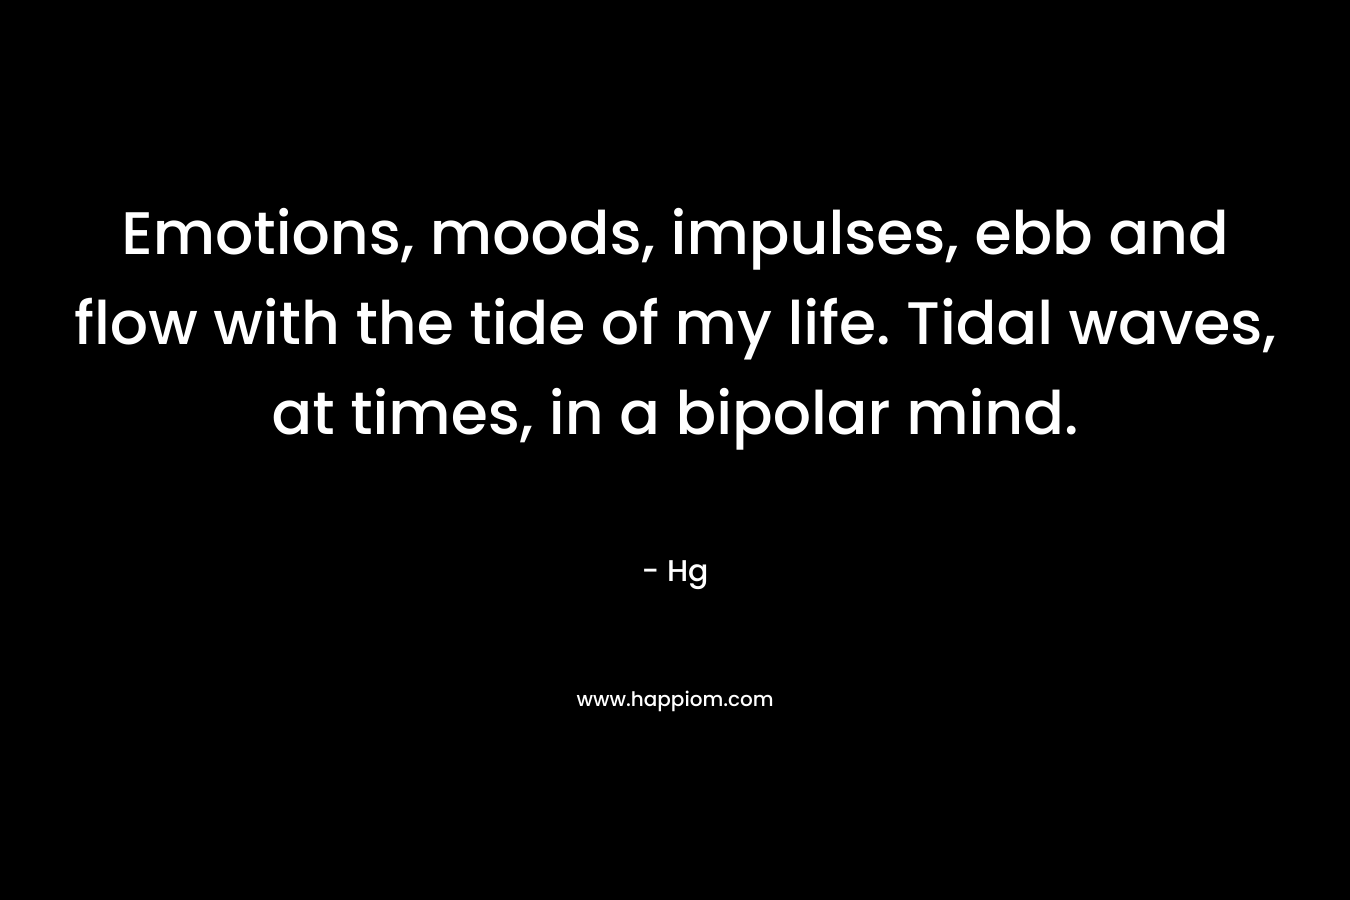 Emotions, moods, impulses, ebb and flow with the tide of my life. Tidal waves, at times, in a bipolar mind. – Hg